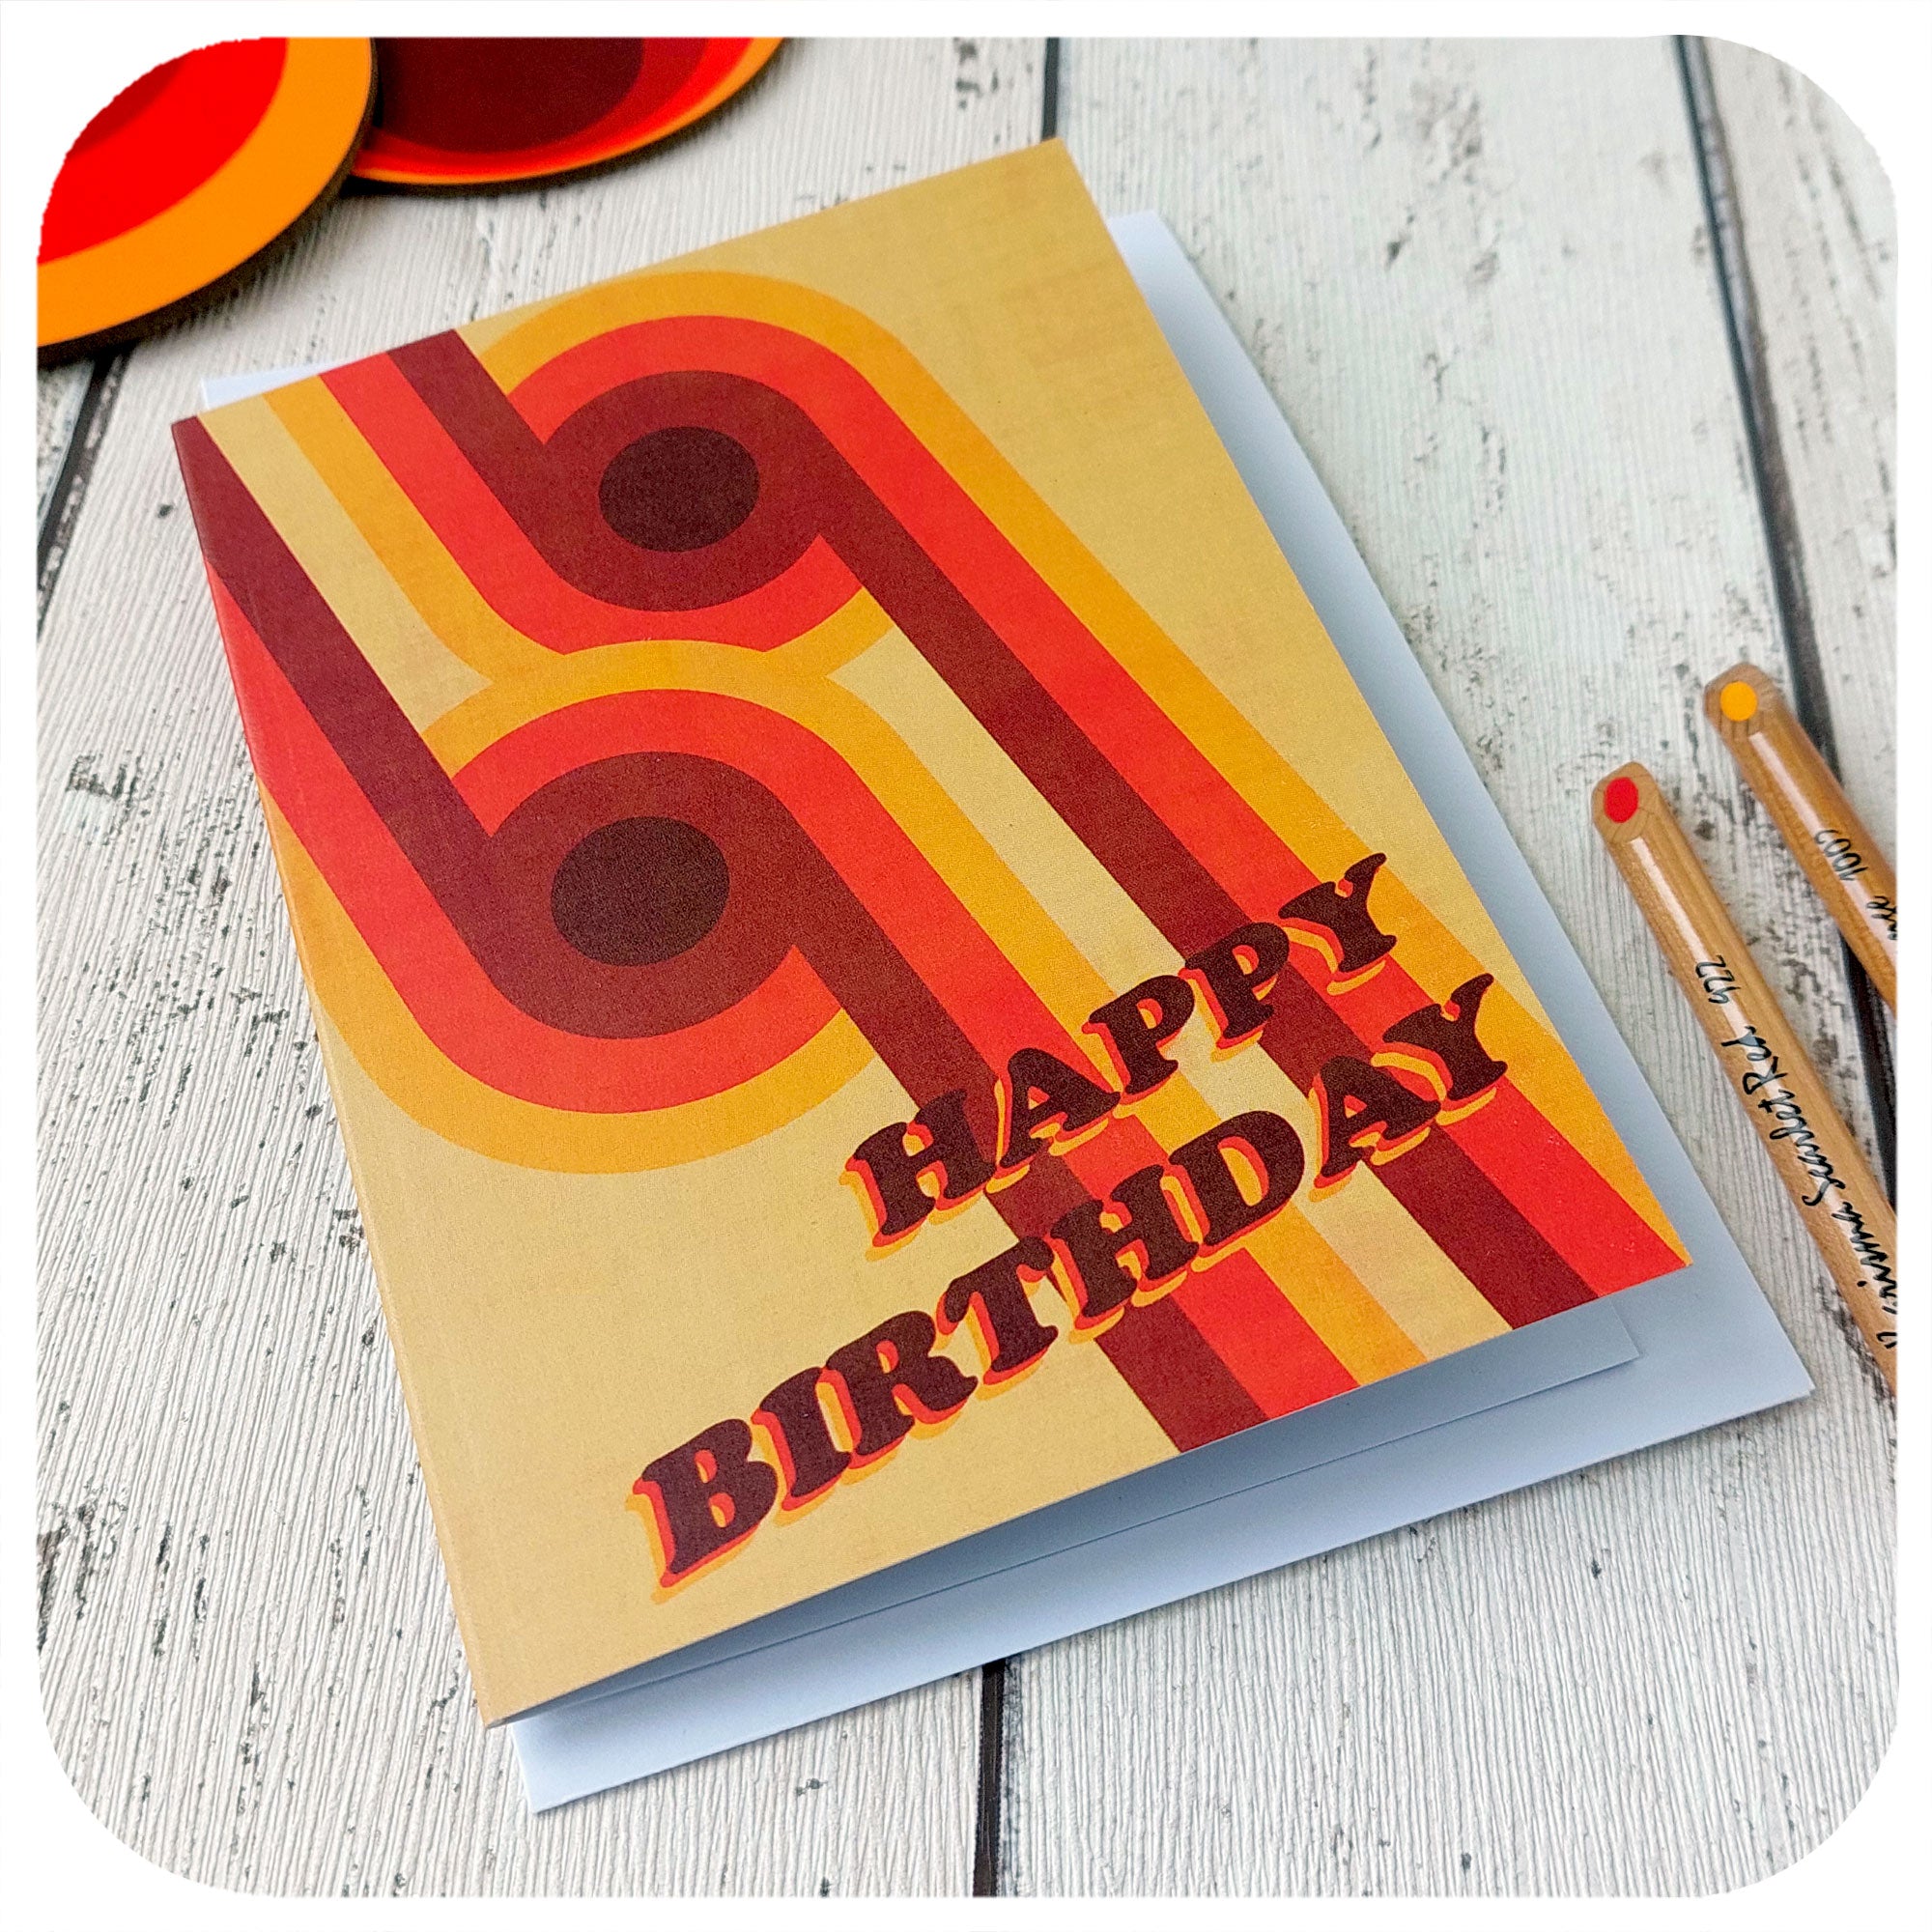 70s Graphic Birthday Card lying on a table with envelope, pencils and retro coasters | The Inkabilly Emporium